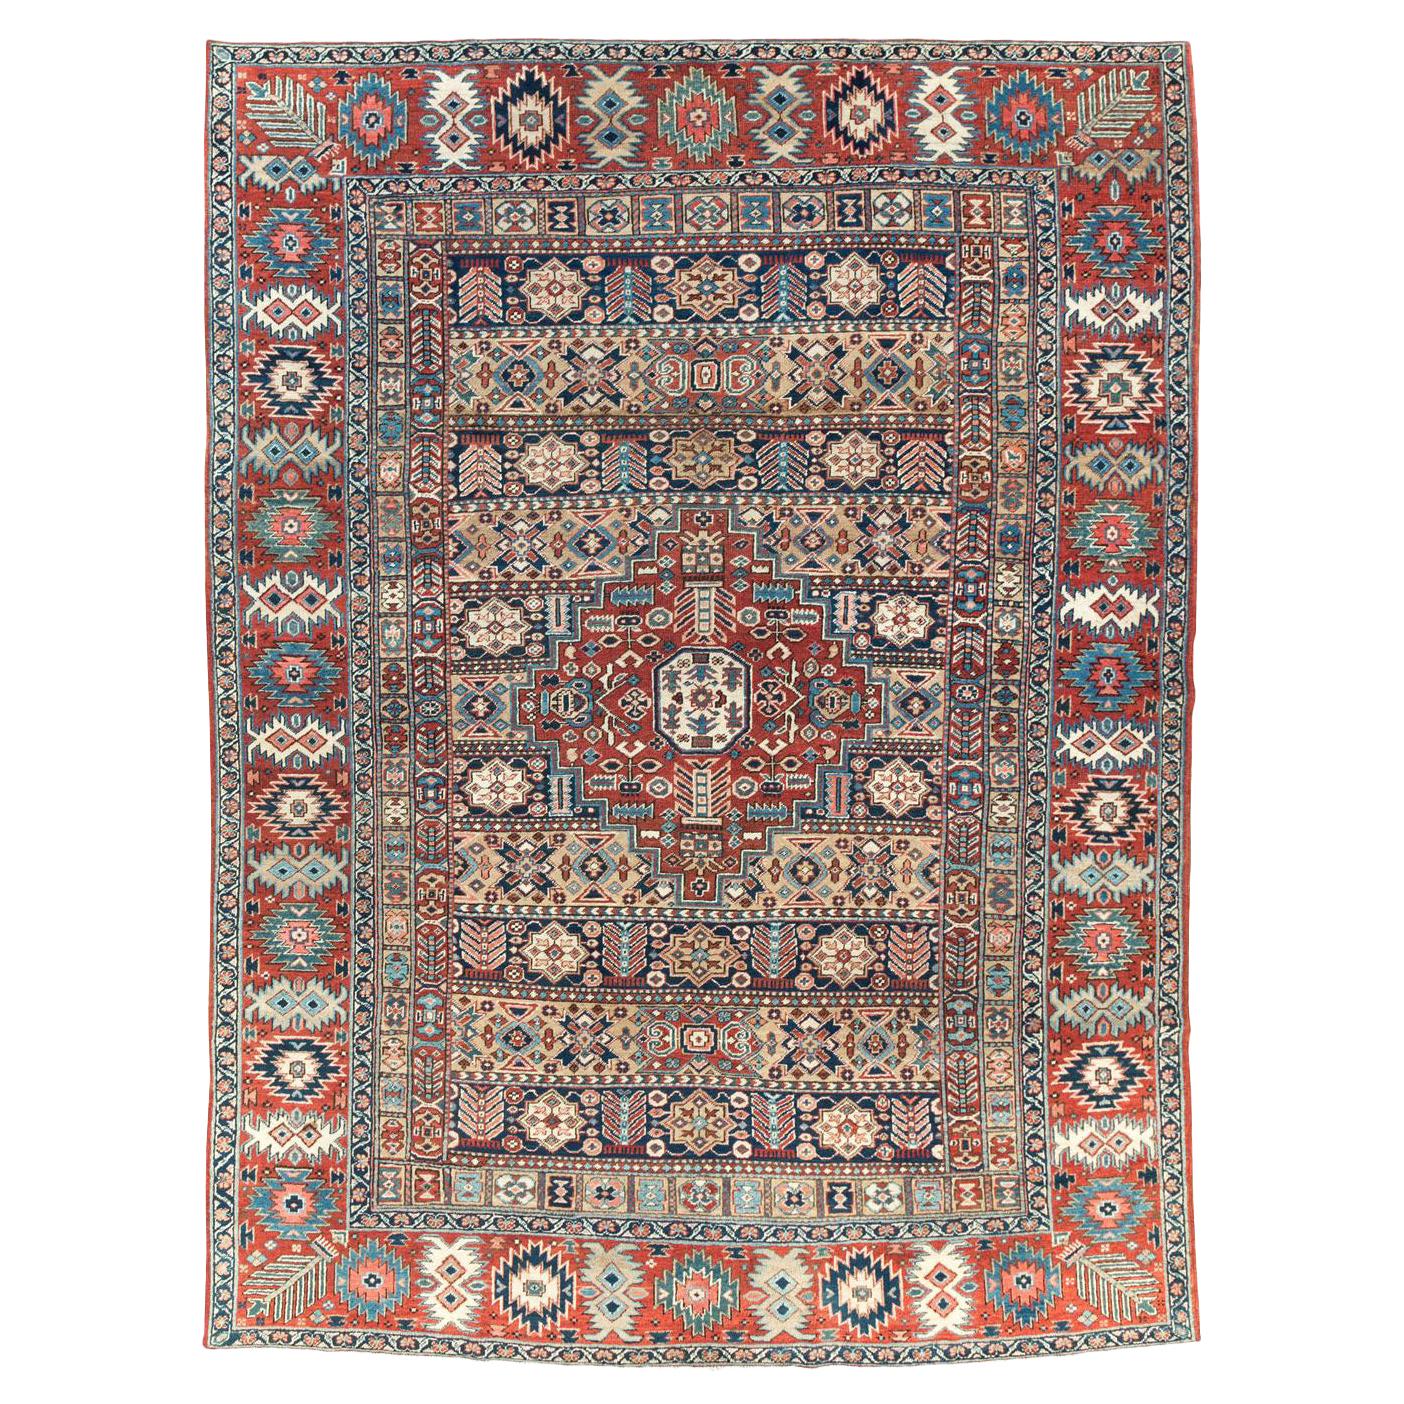 Early 20th Century Handmade Persian Heriz Room Size Carpet For Sale